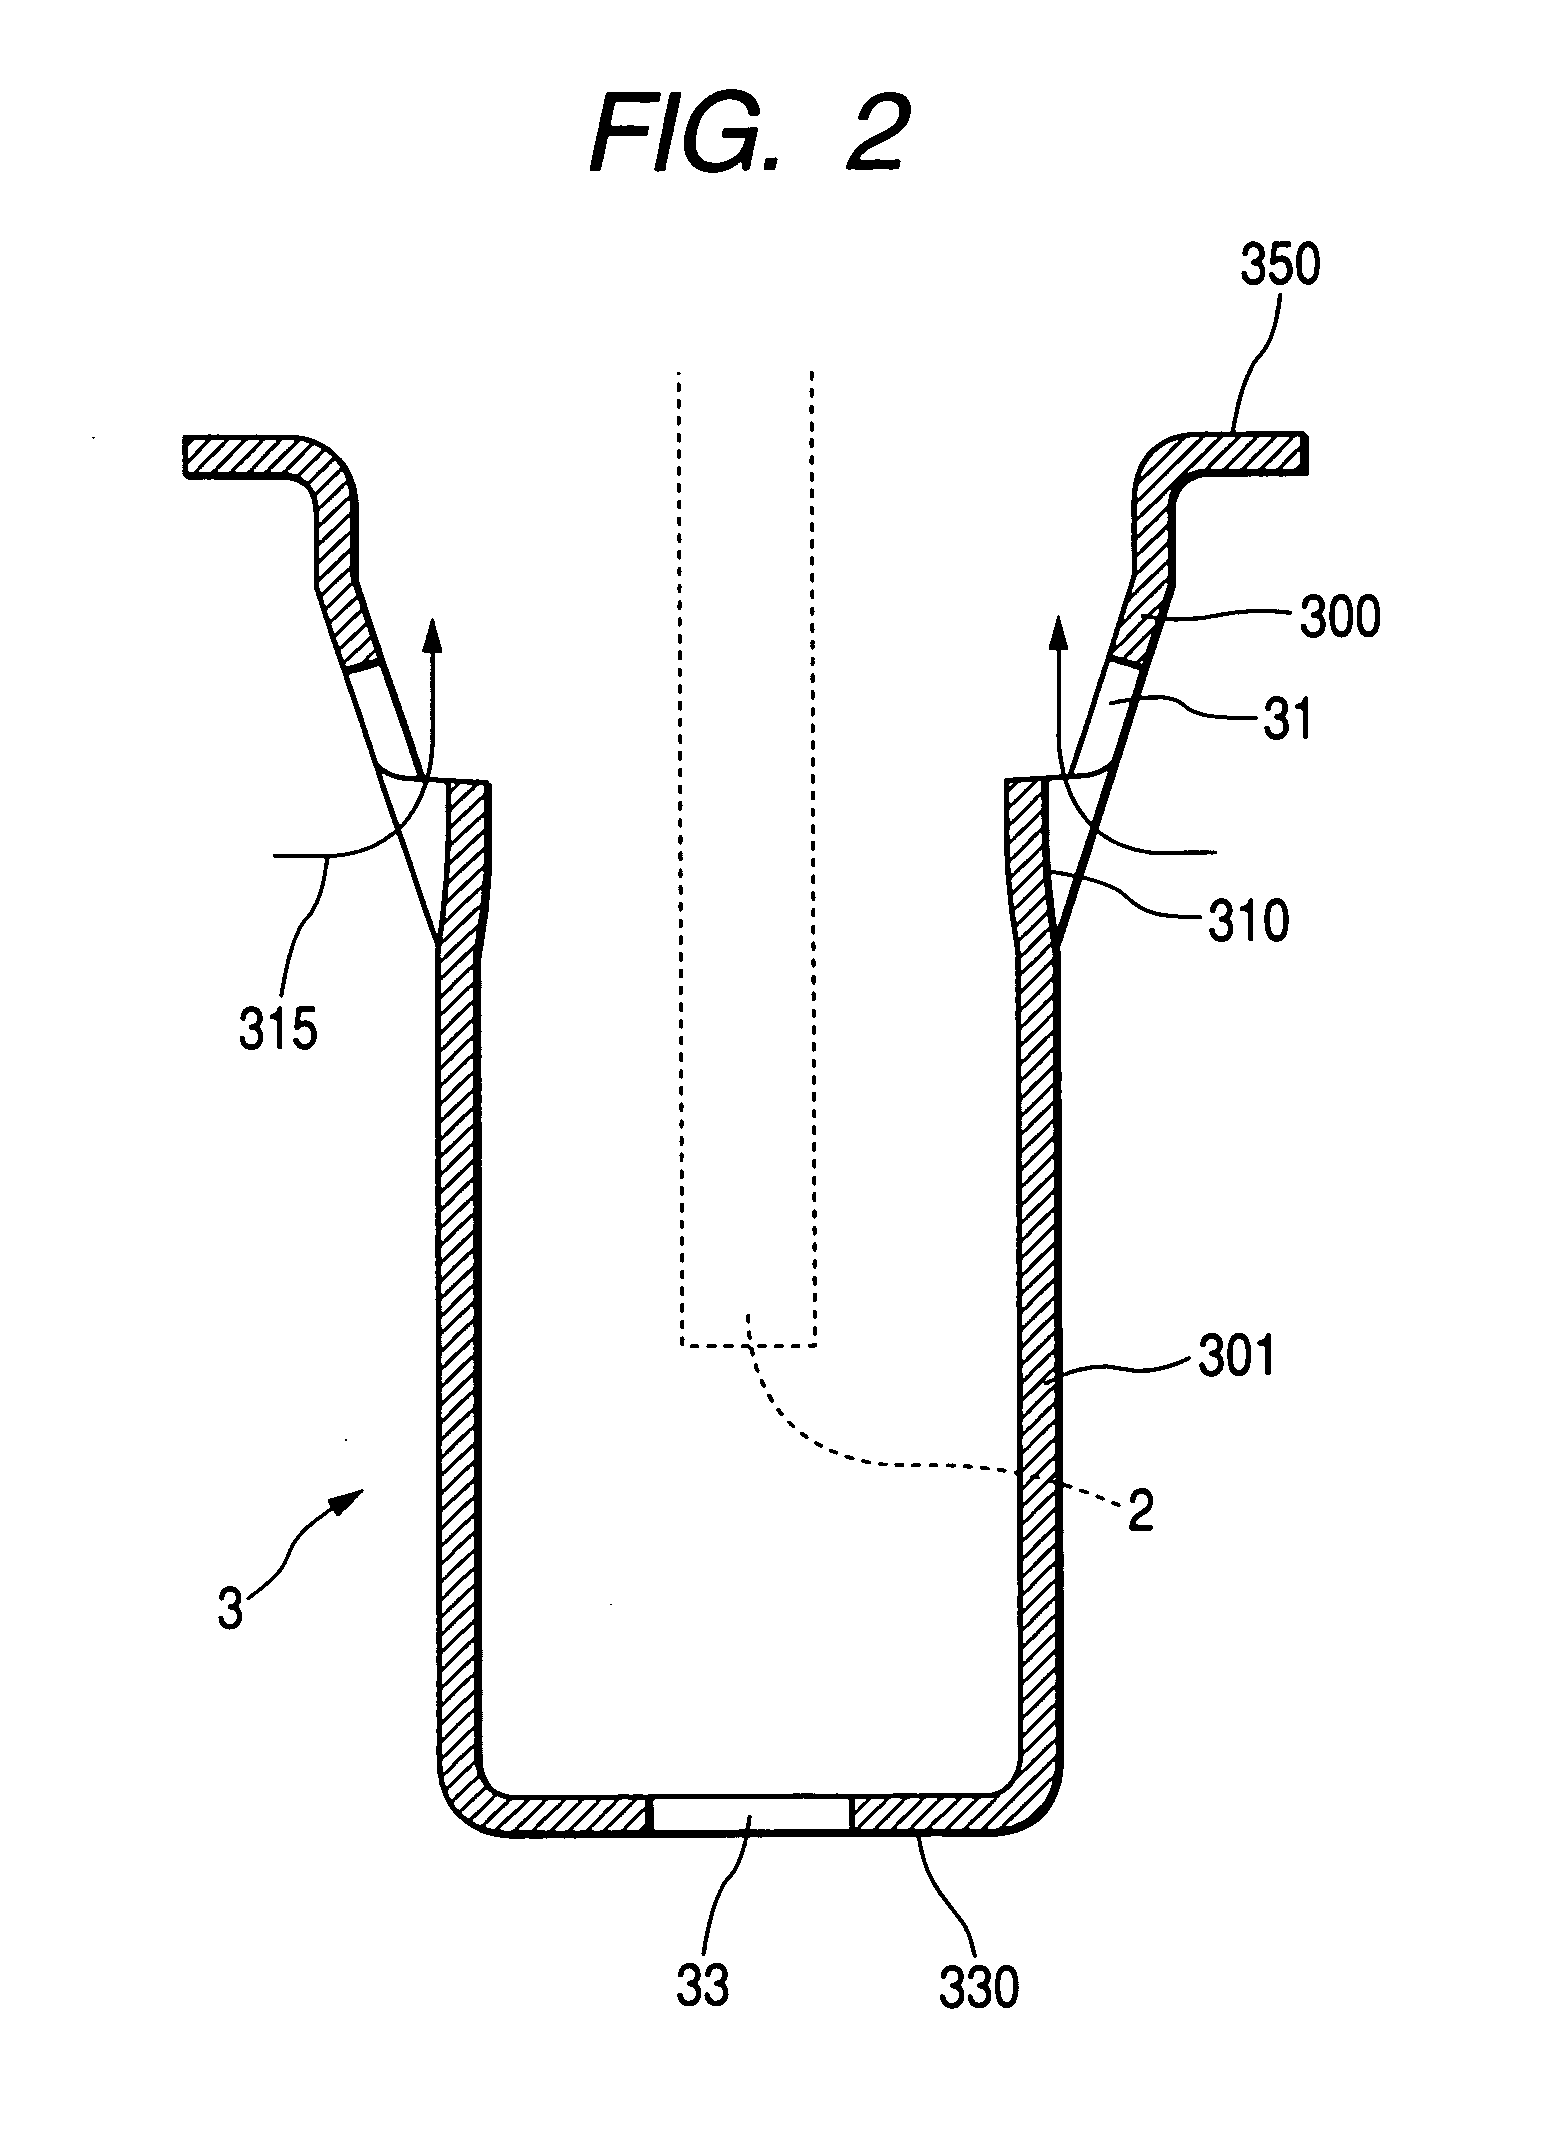 Gas sensor equipped with gas inlet designed to create desired flow of gas